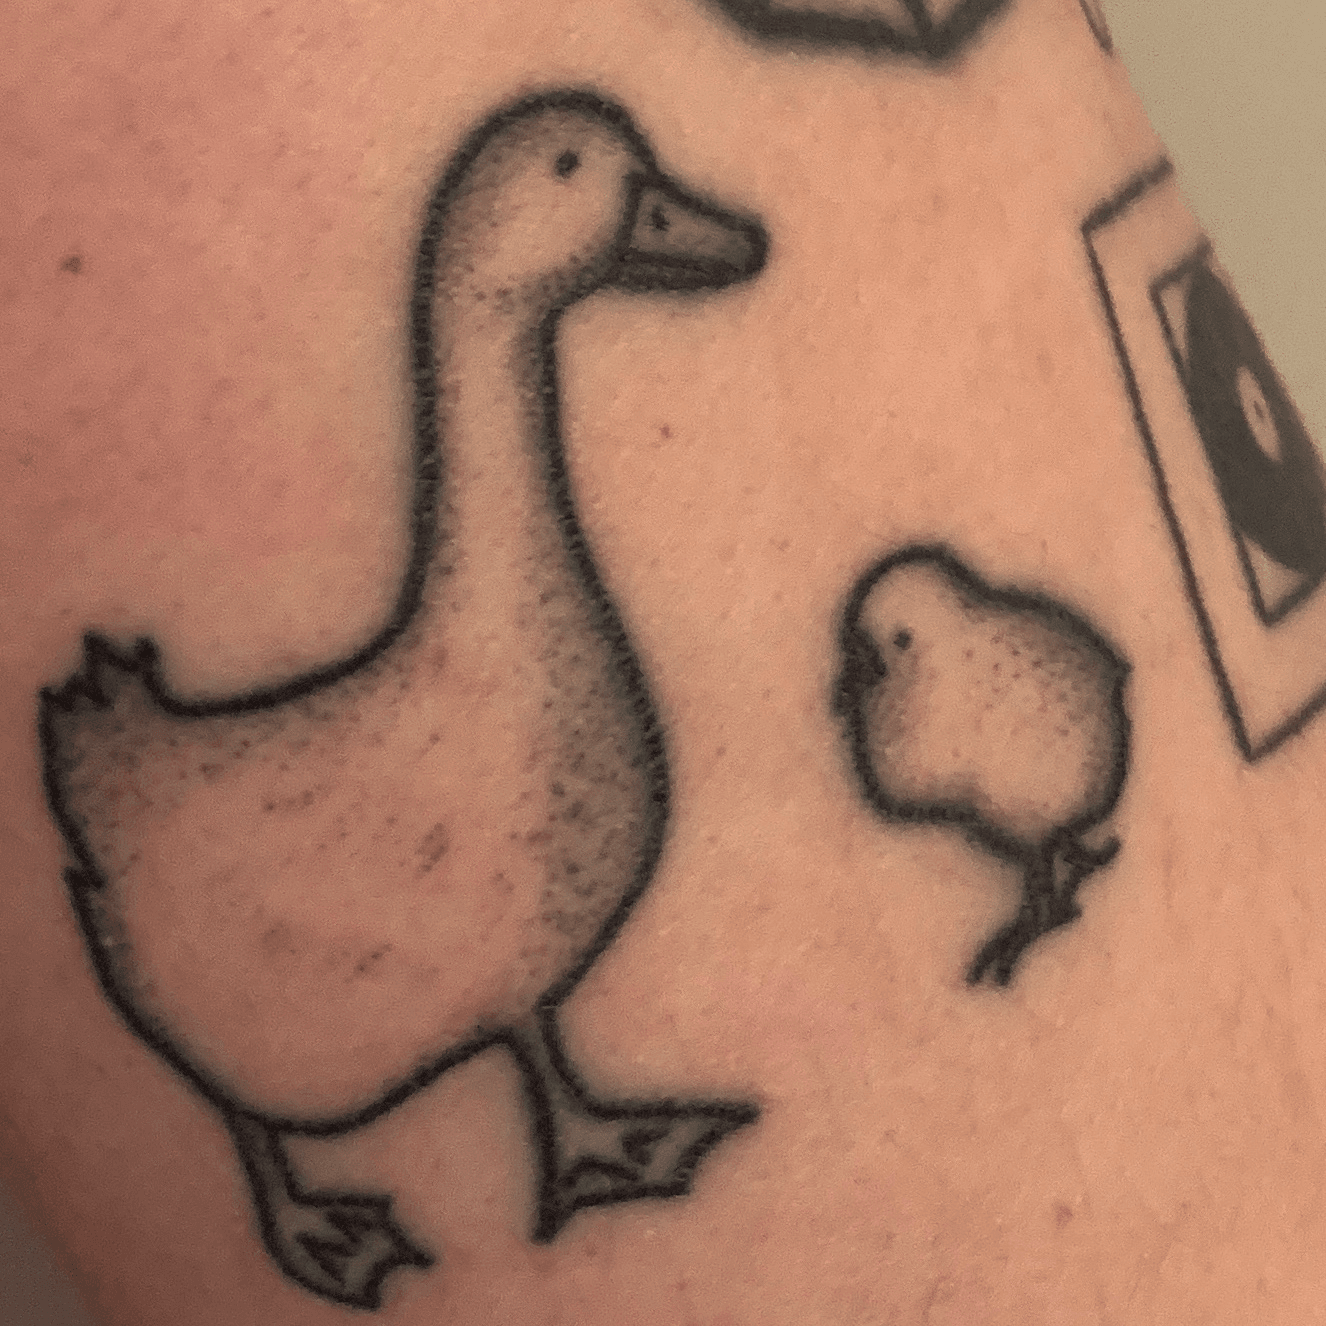 Buy Duck Outline Temporary Fake Tattoo Sticker set of 2 Online in India   Etsy